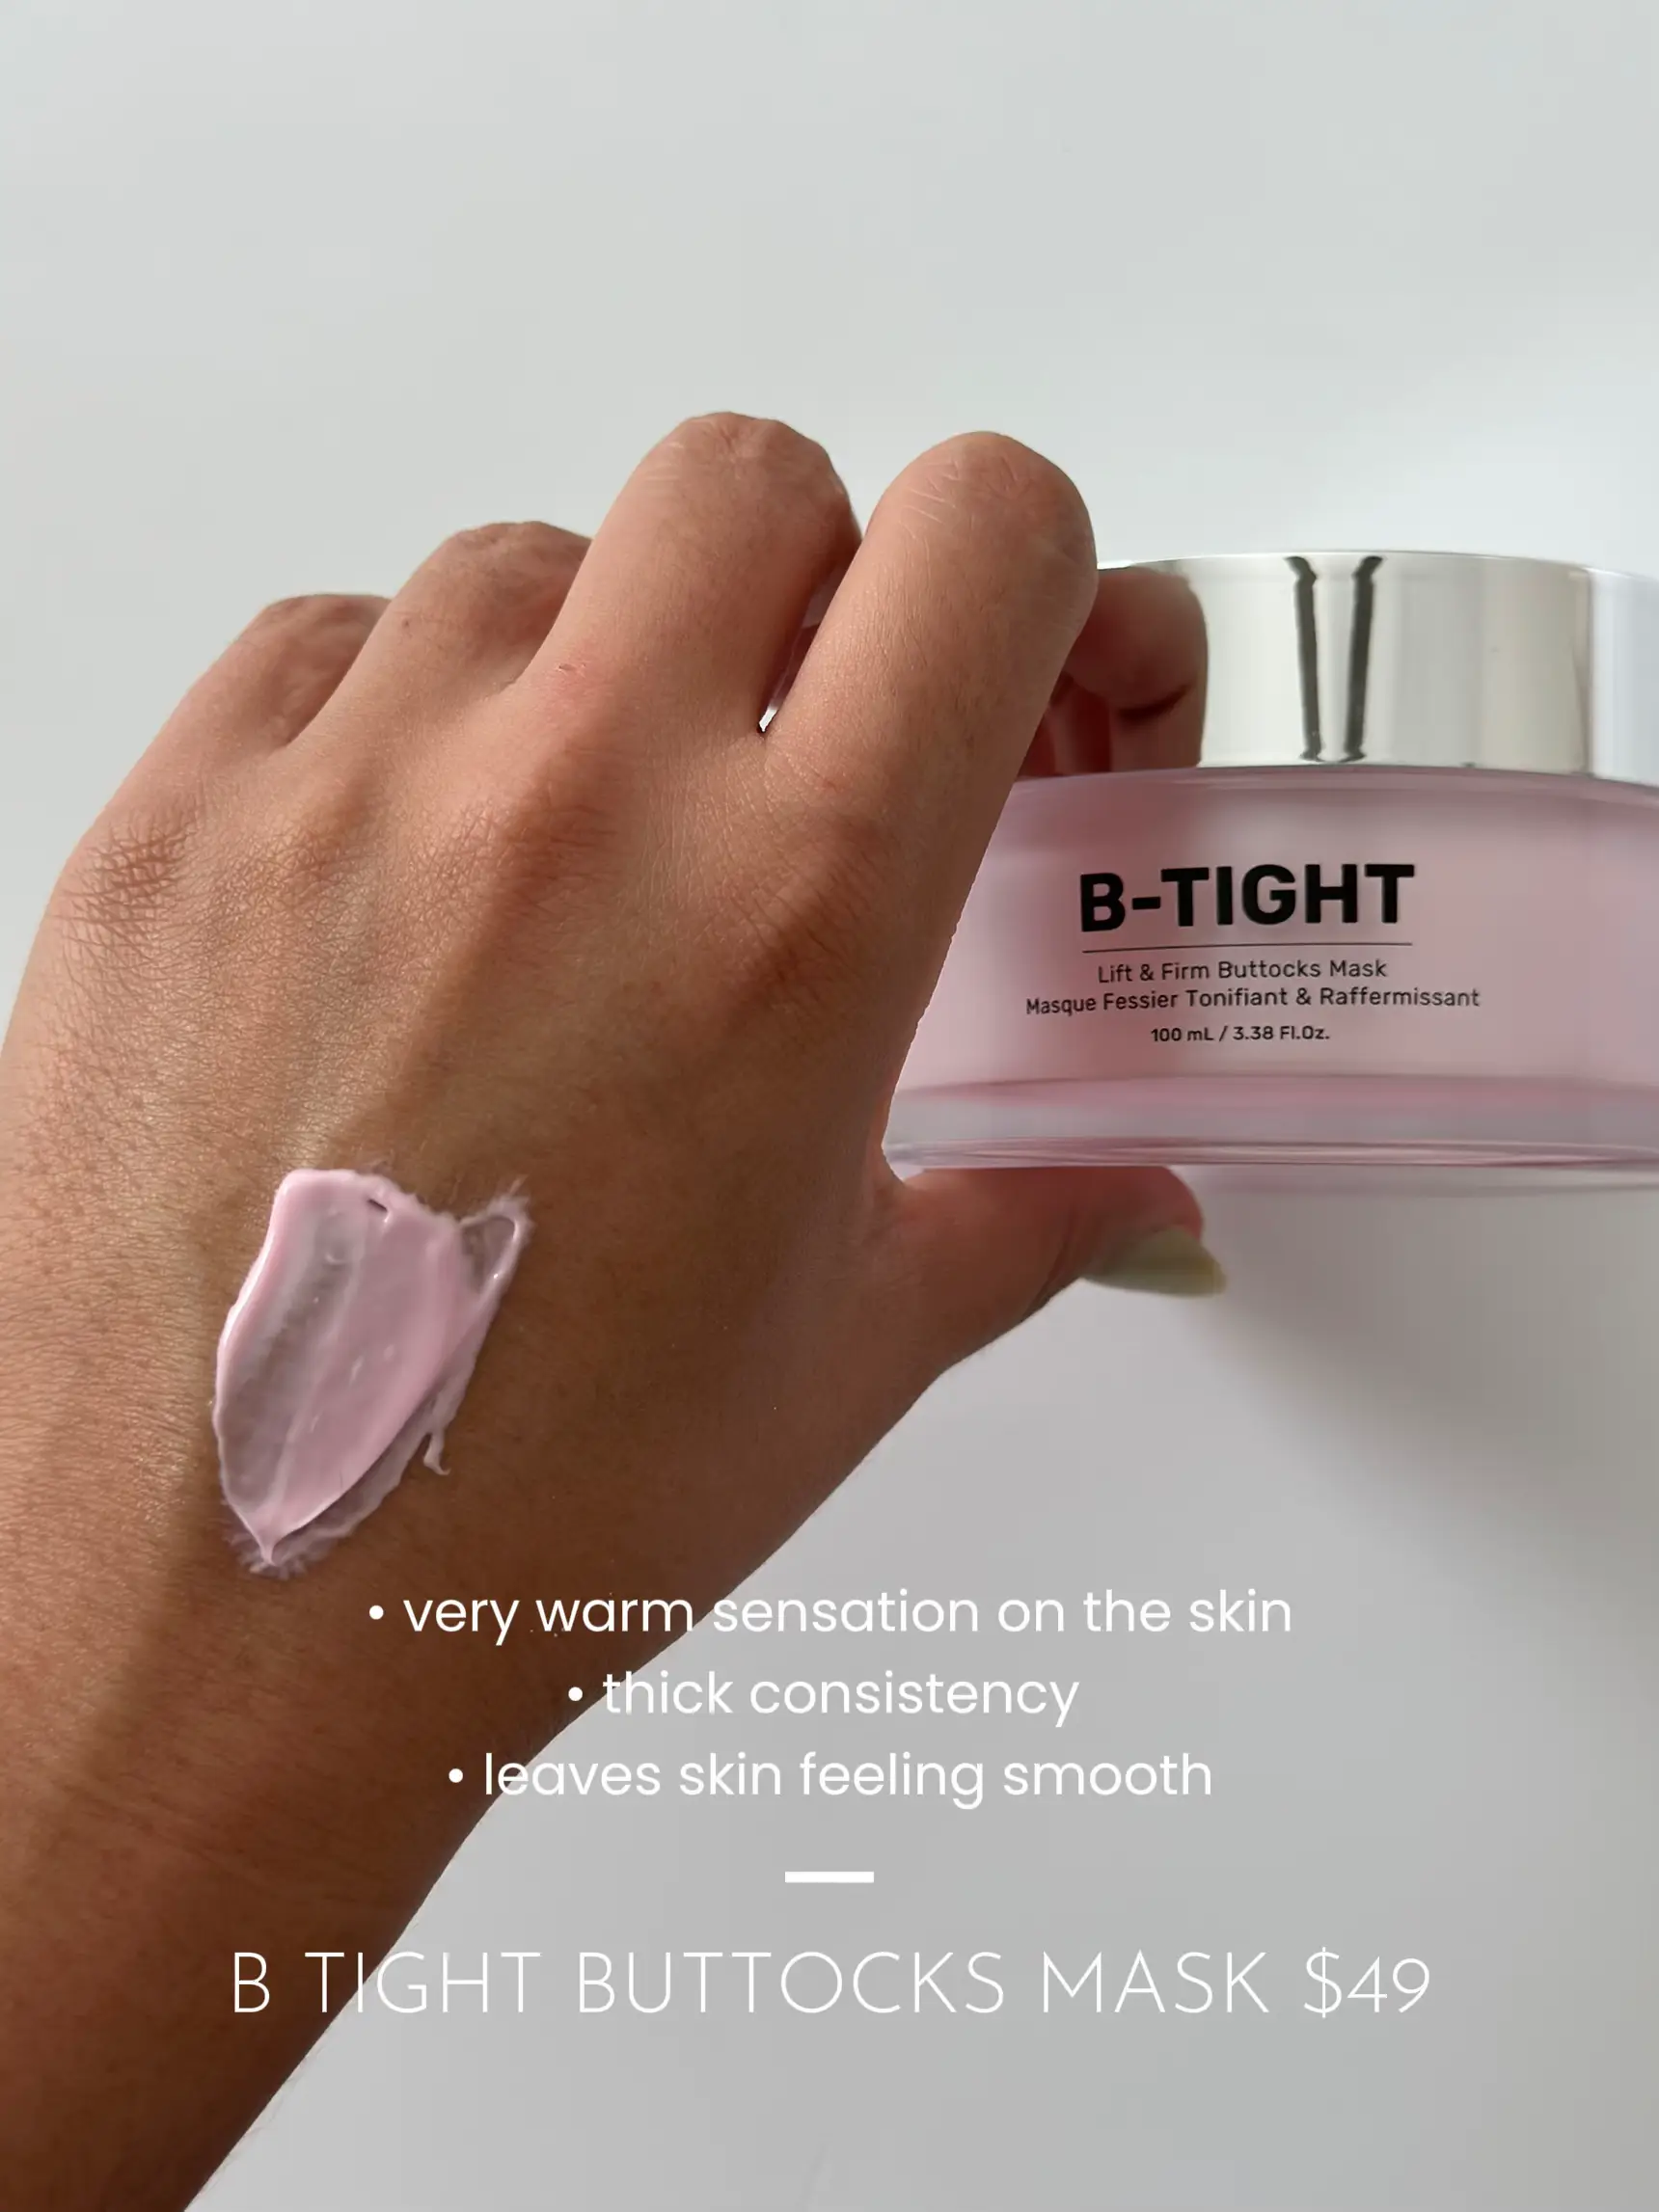 B-TIGHT Lift & Firm Booty Mask Anti-Cellulite